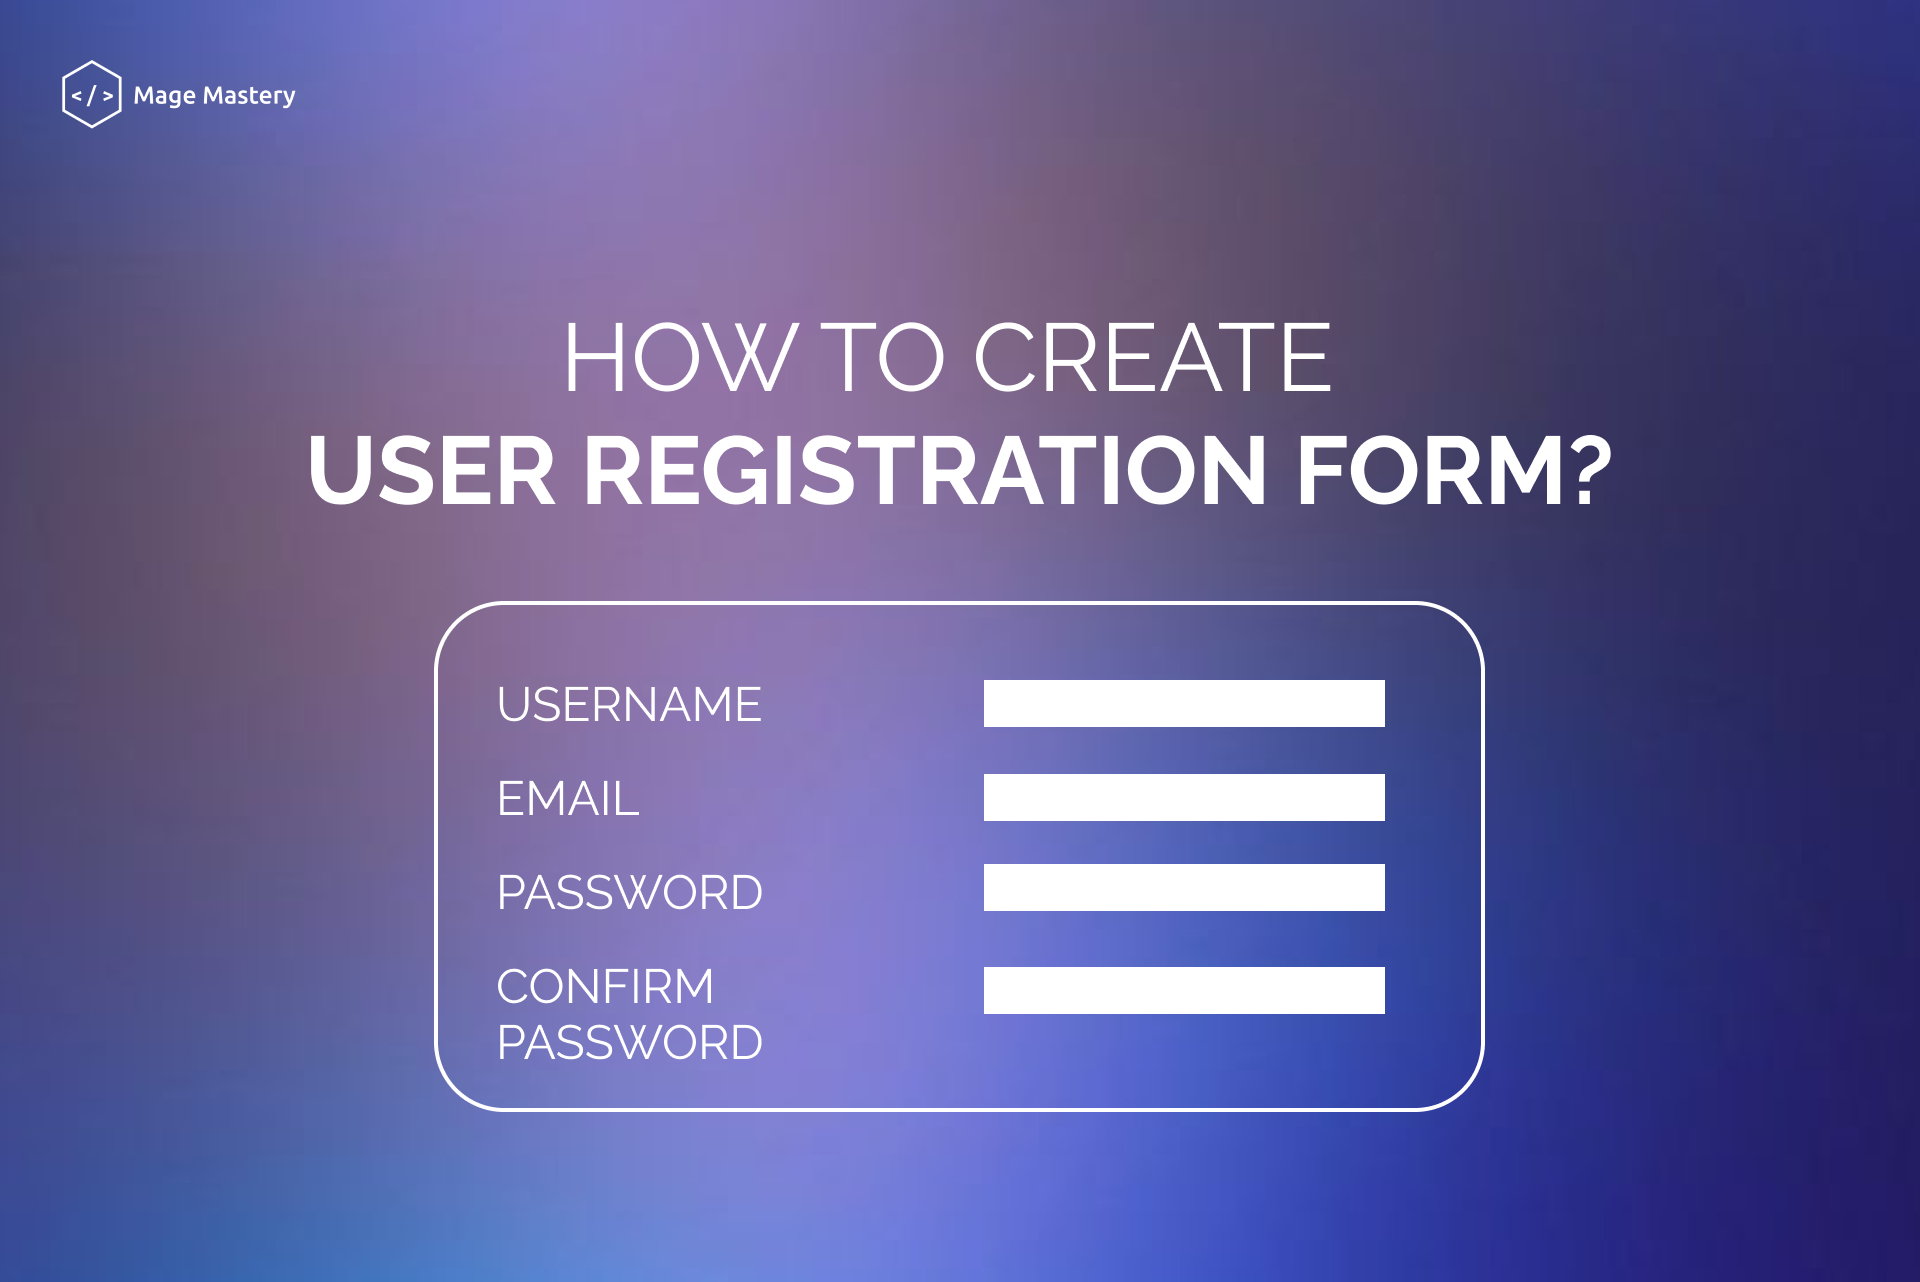 How to create a User Registration Form?